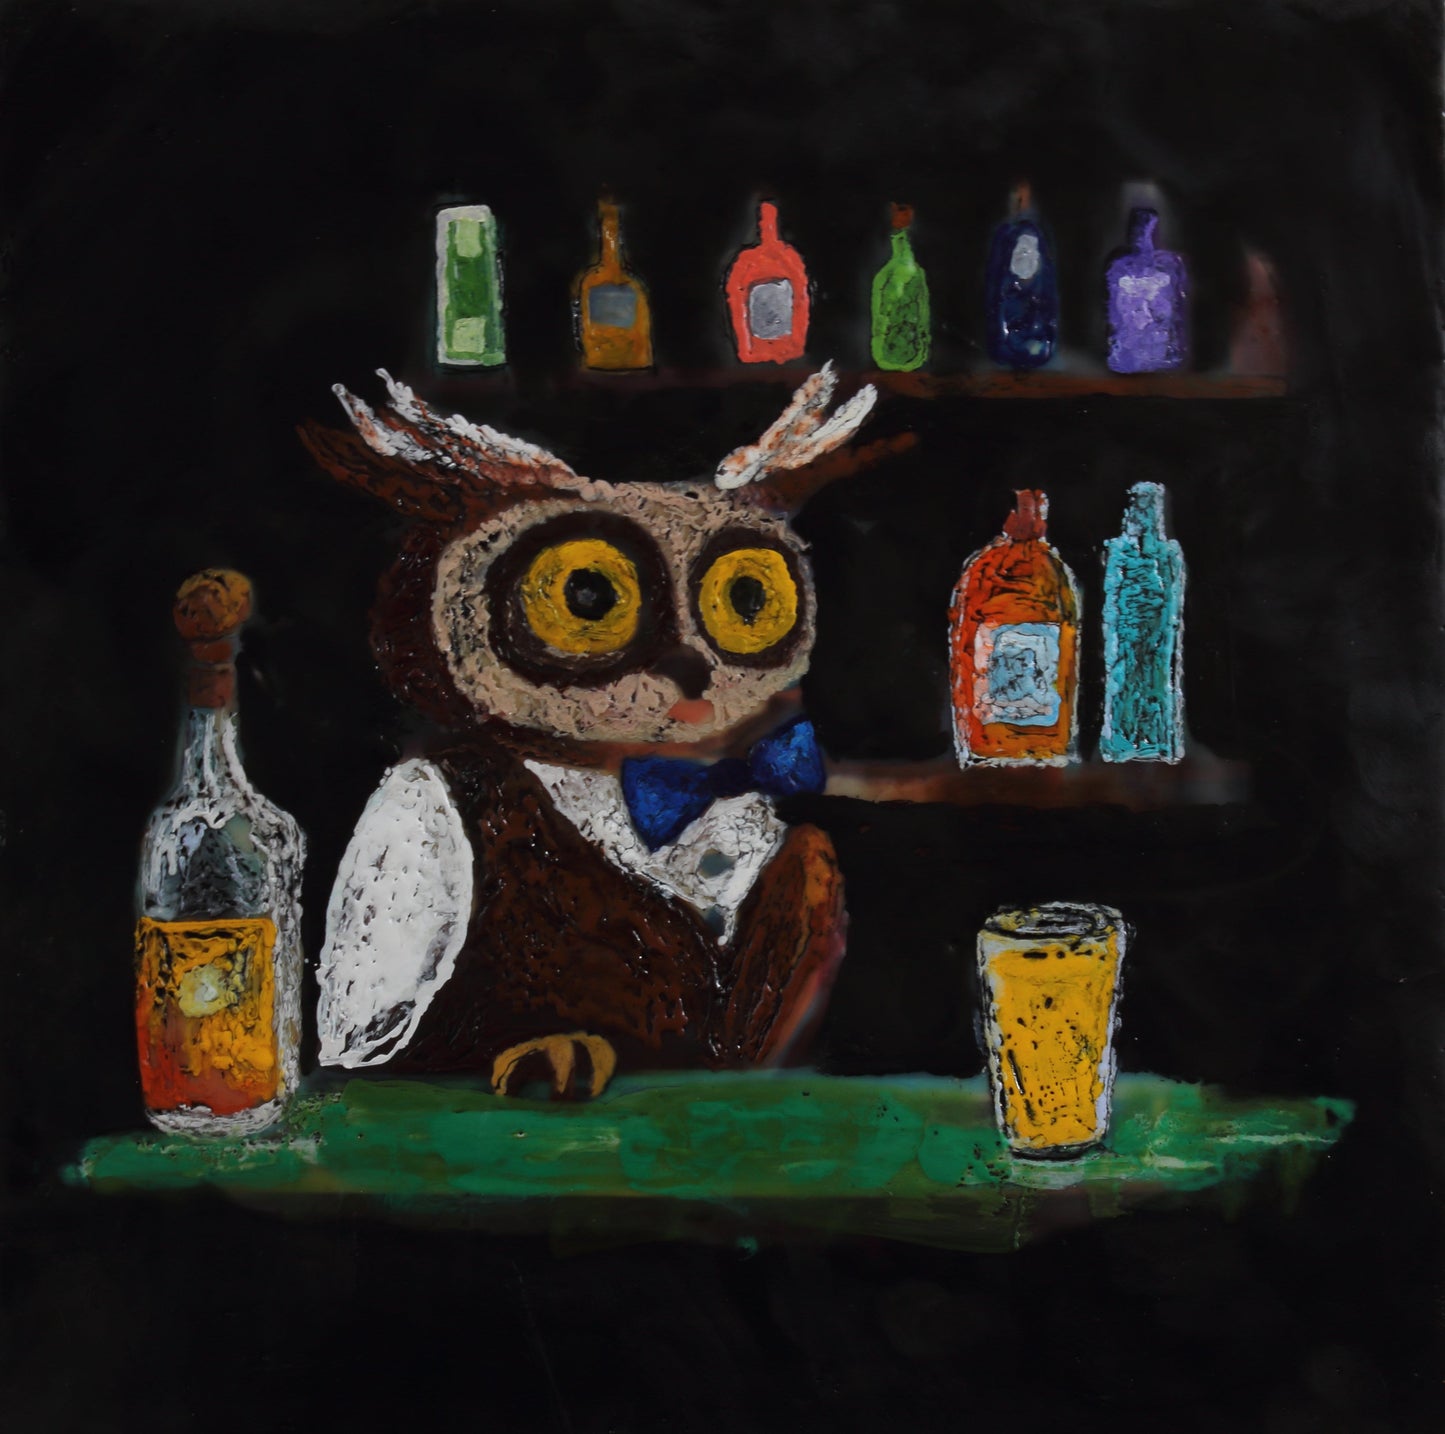 Night Owl-Painting - Mike Giannella - Encaustic Painting - Mixed Media Artist - Art Prints